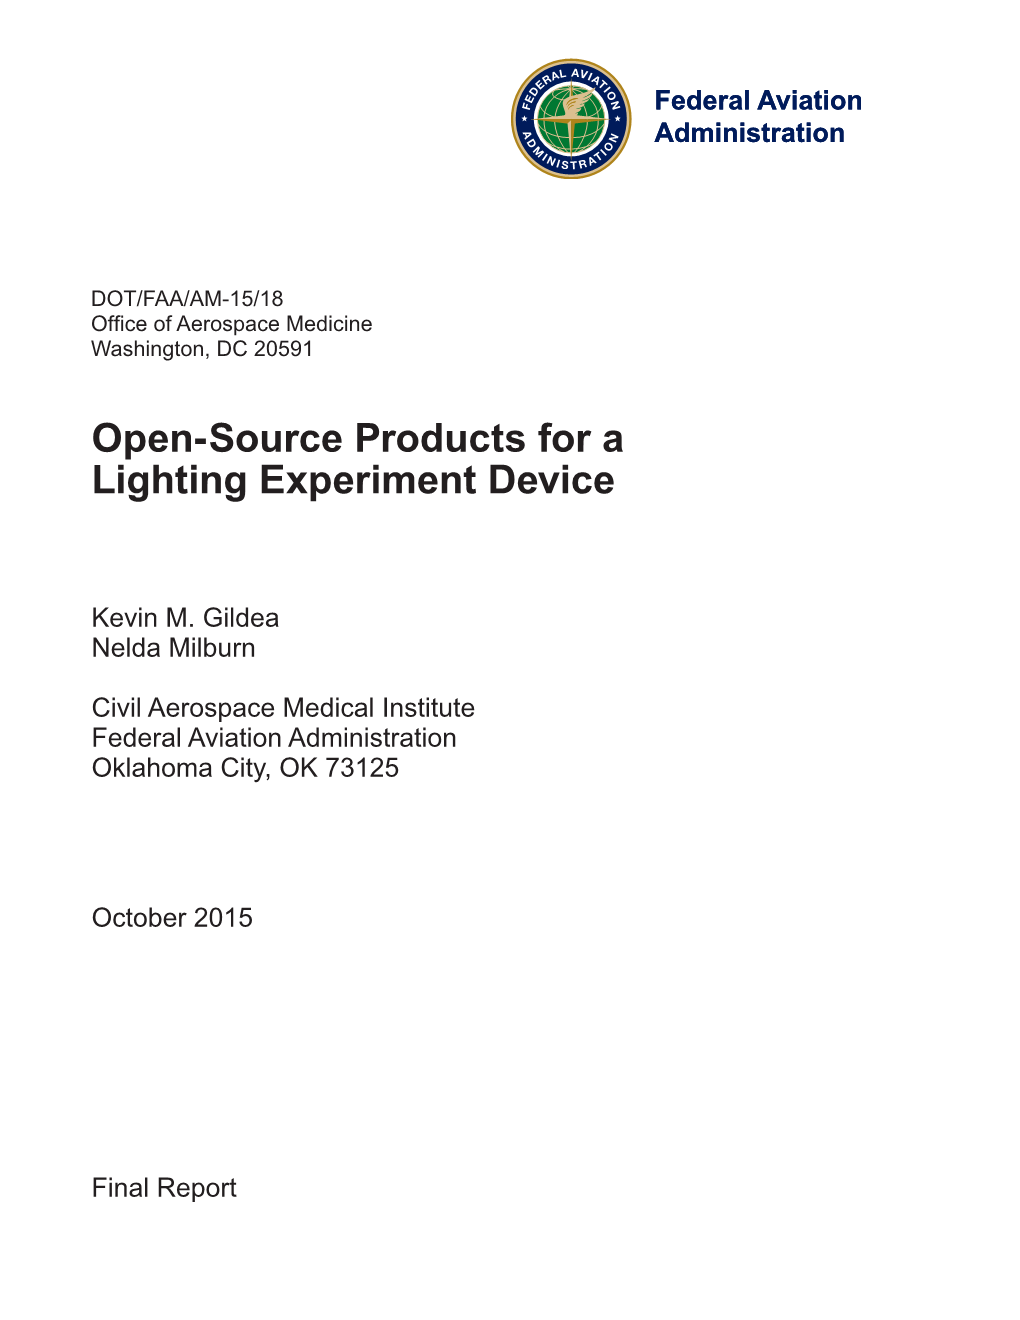 Open Source Products for a Lighting Experiment Device